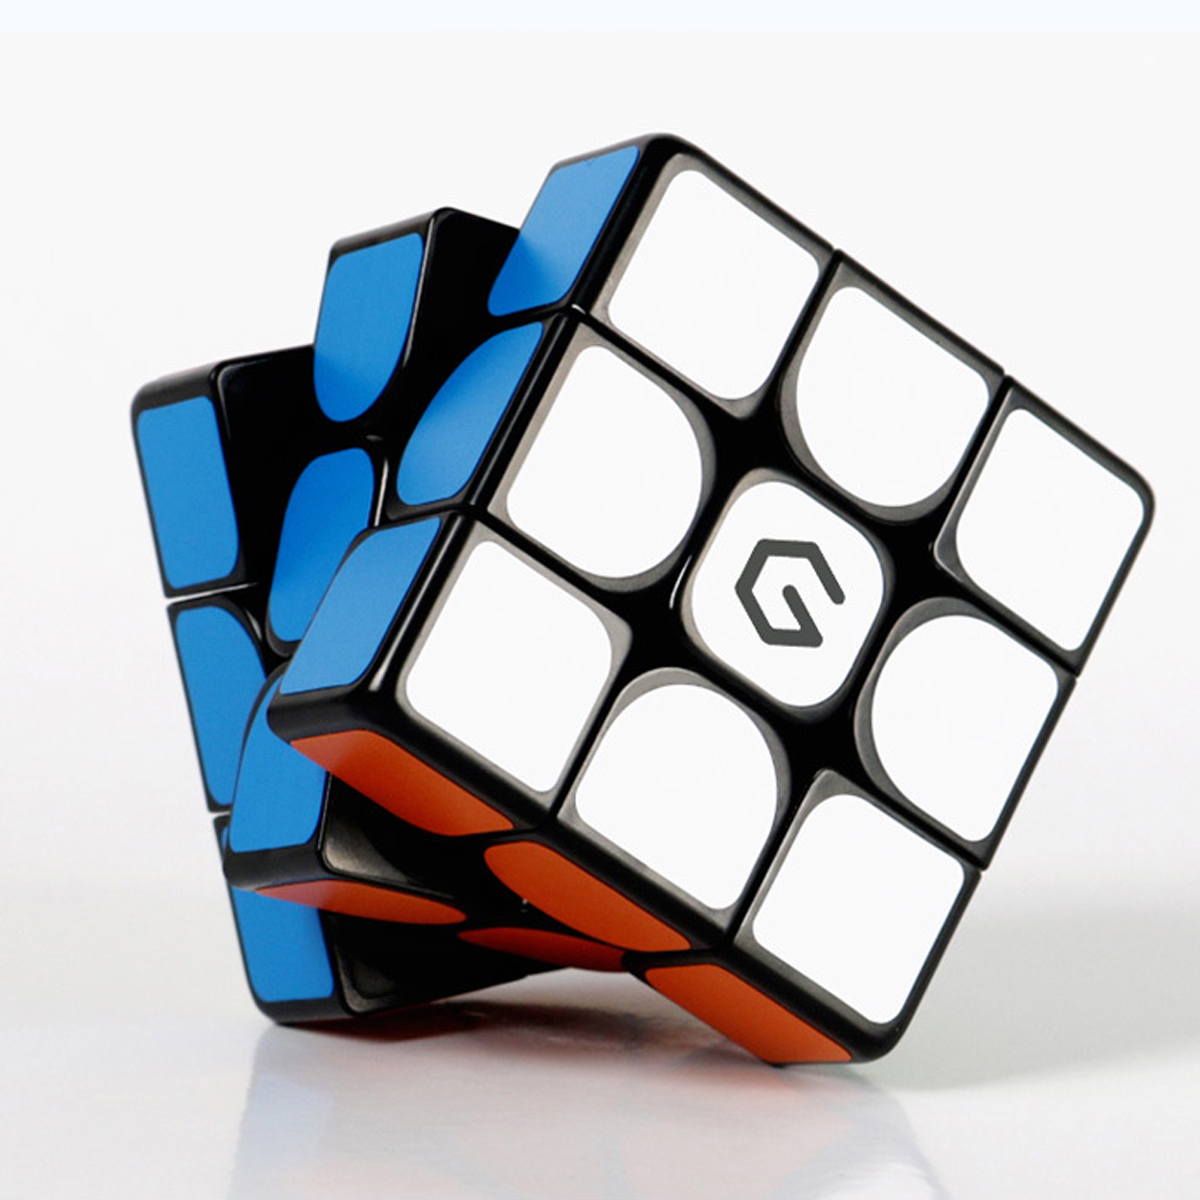 

Giiker M3 Magnetic Cube 3x3x3 Vivid Color Square Magic Cube Puzzle Science Education Toy Gift from xiaomi youpin